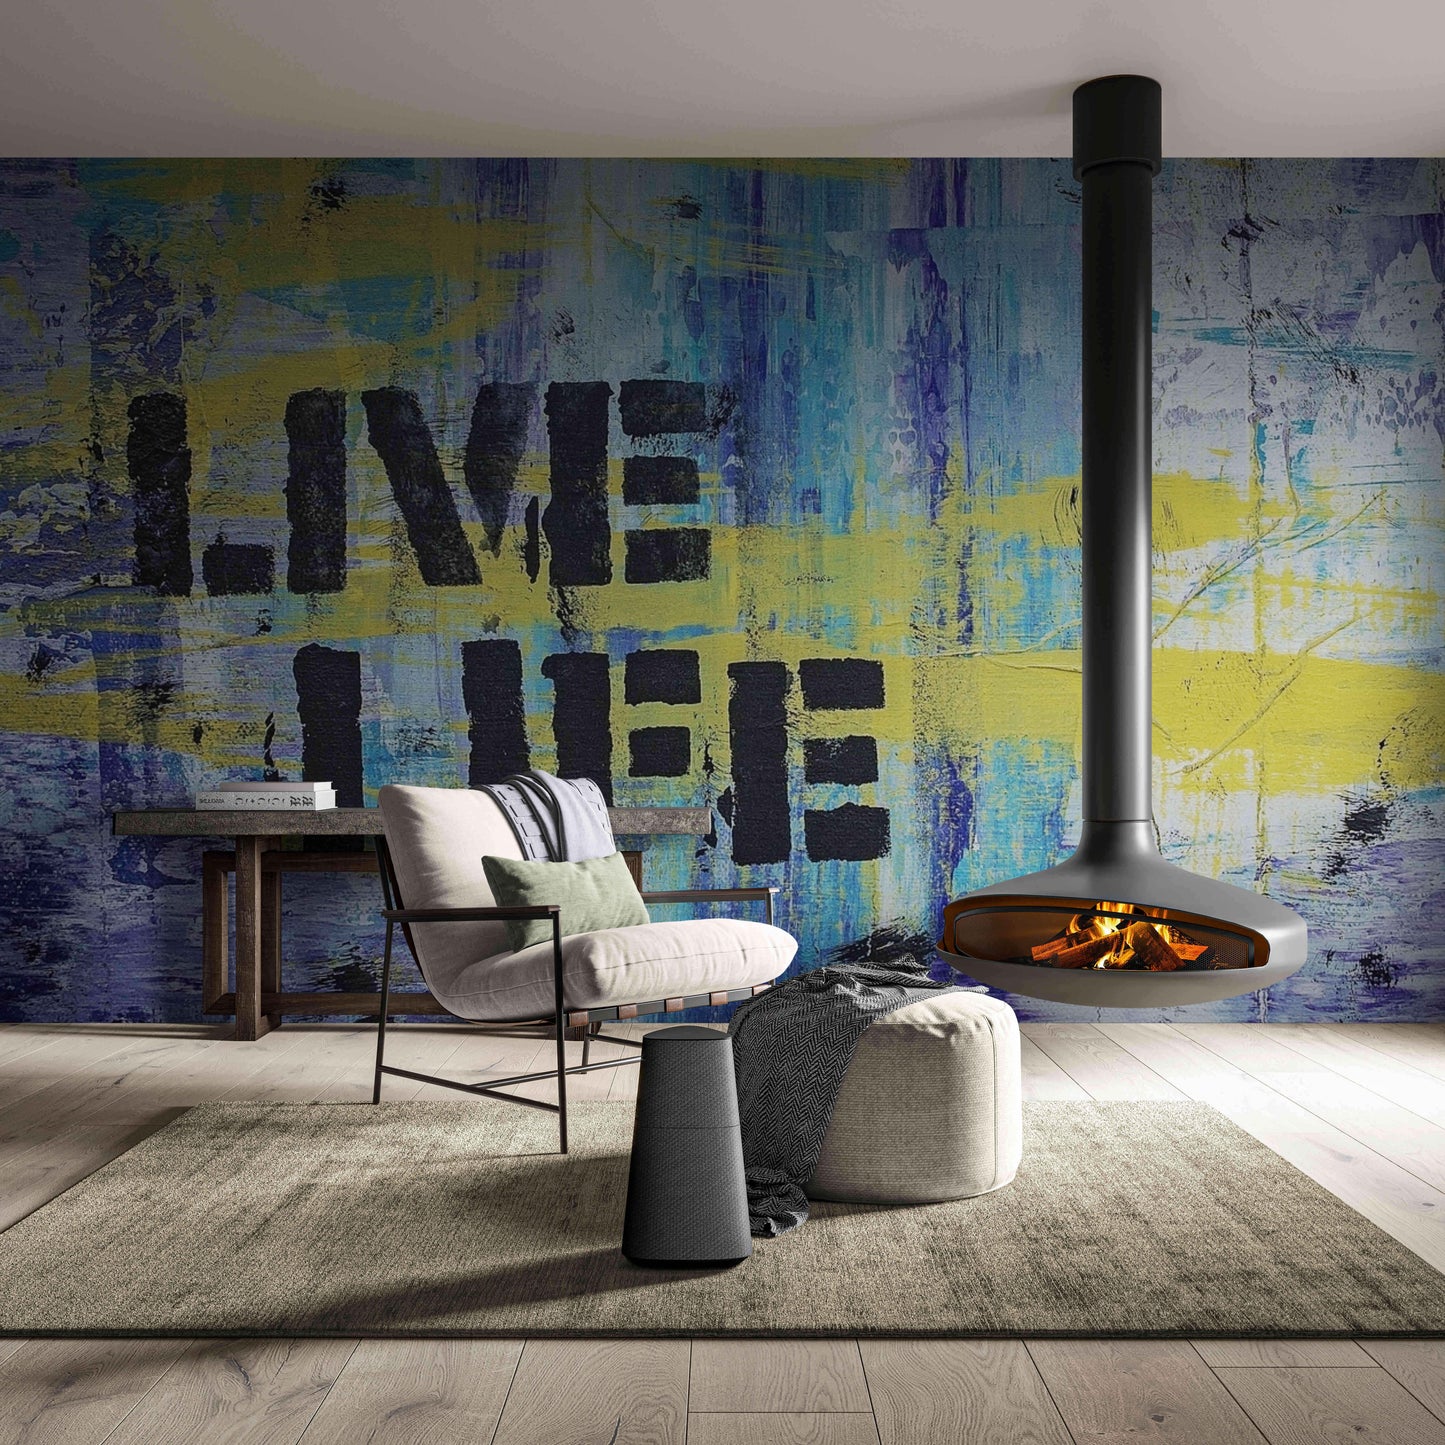 Energetic blue and yellow wall featuring 'Live' graffiti inscription, symbolizing vitality and inspiration.